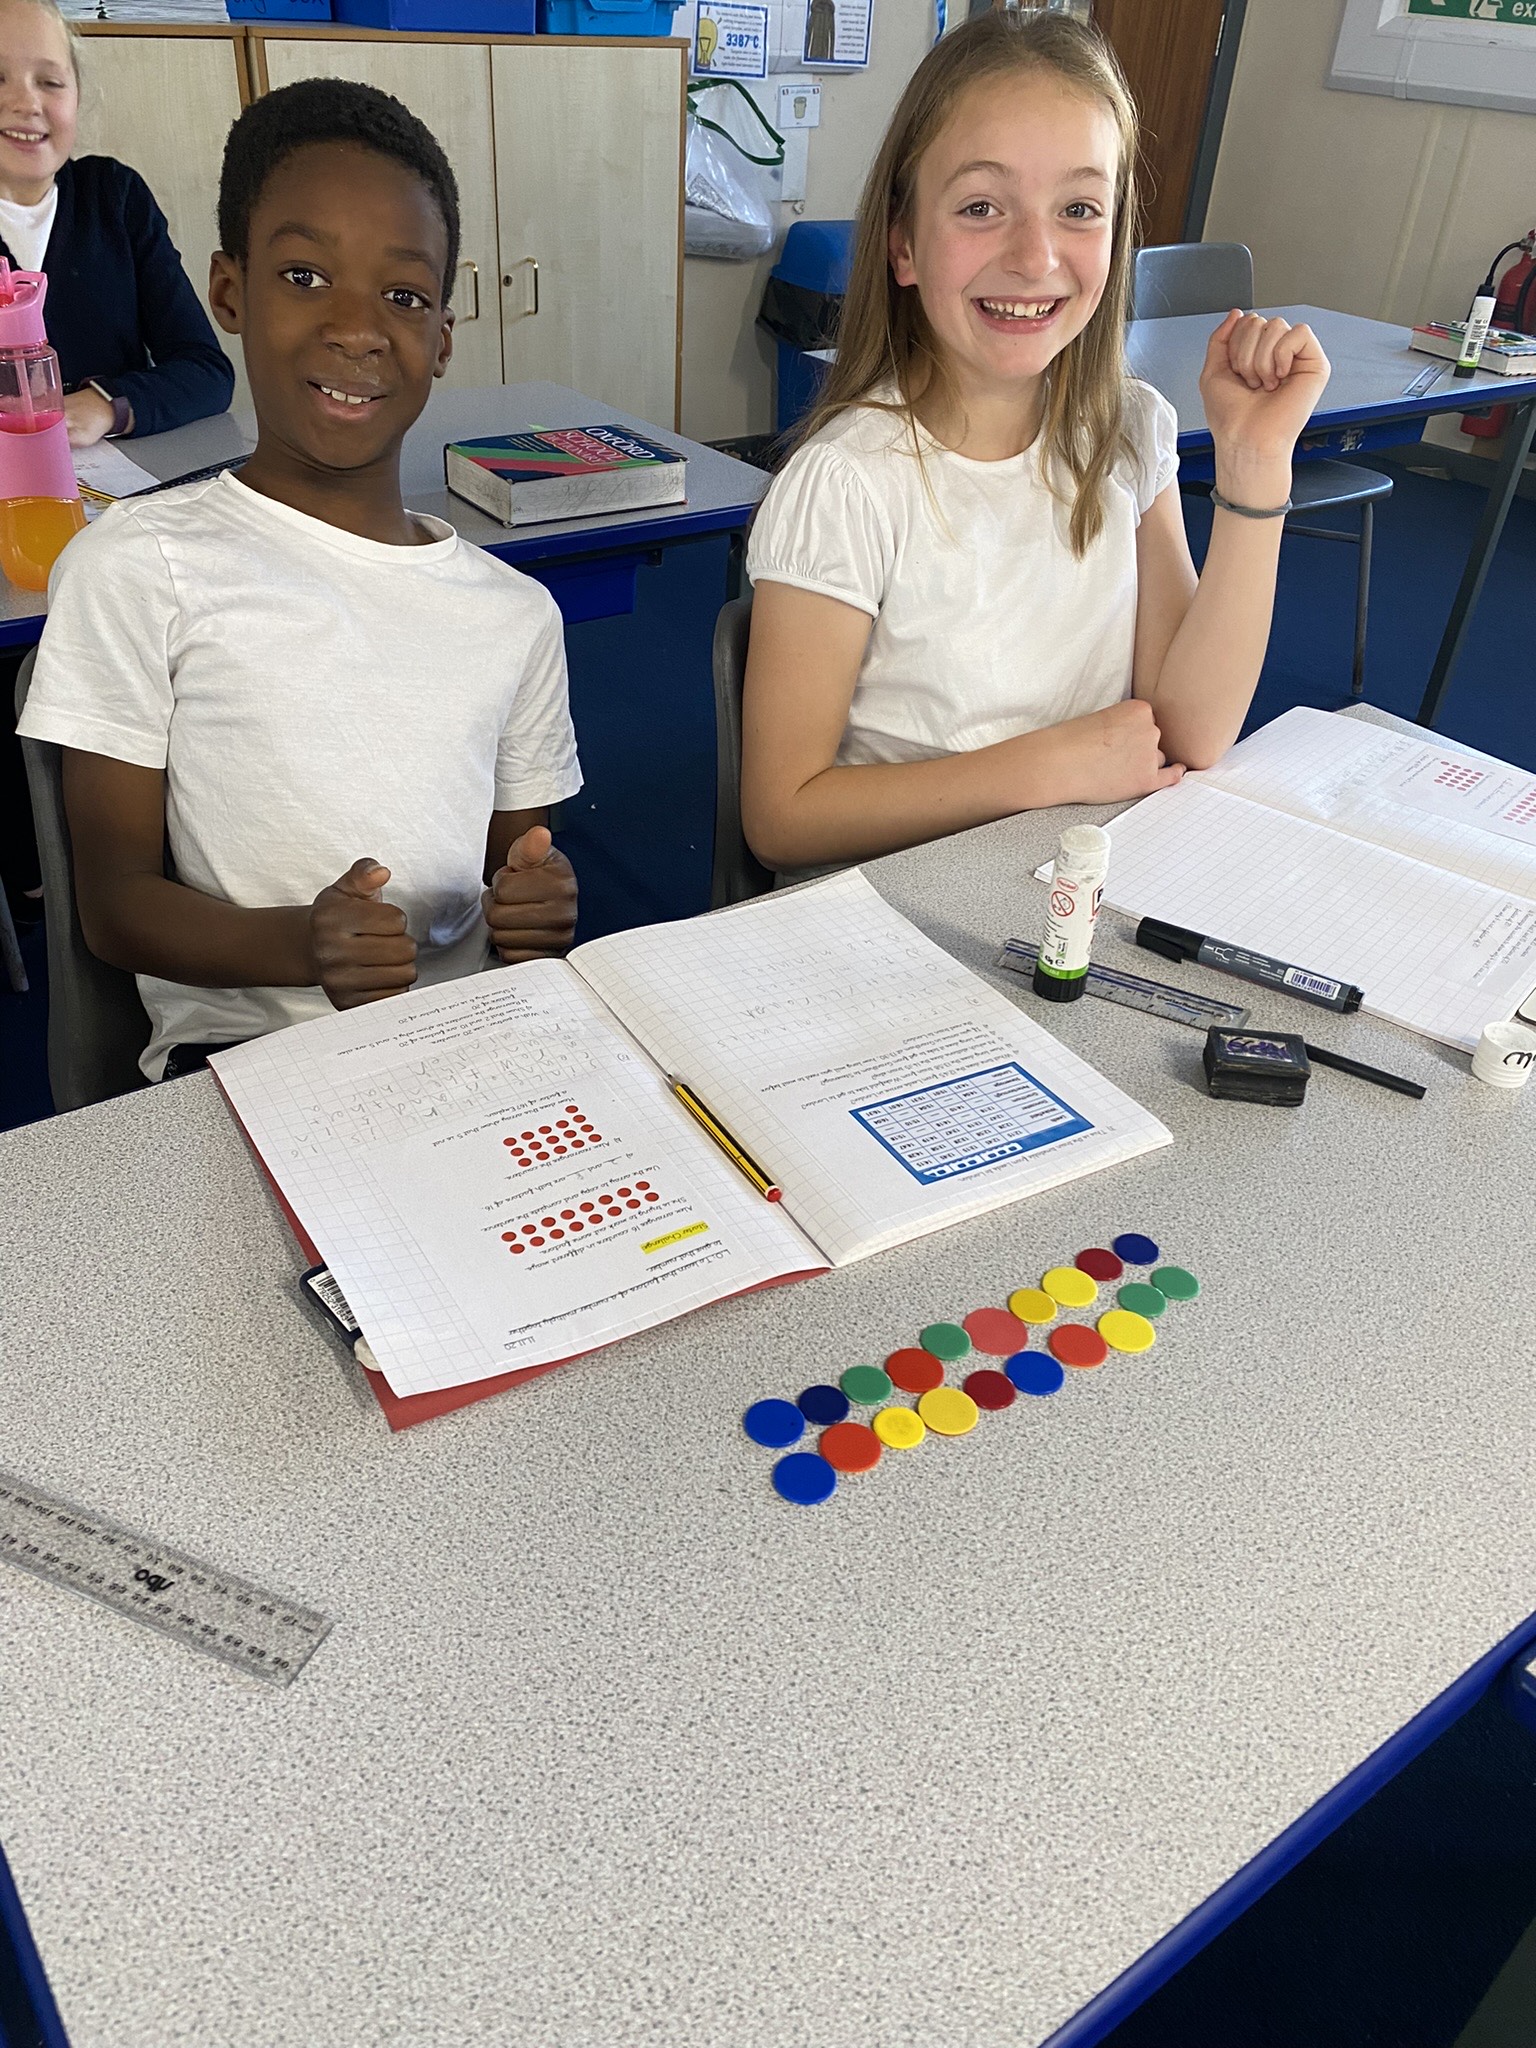 Year 5 children working to find factors using counters